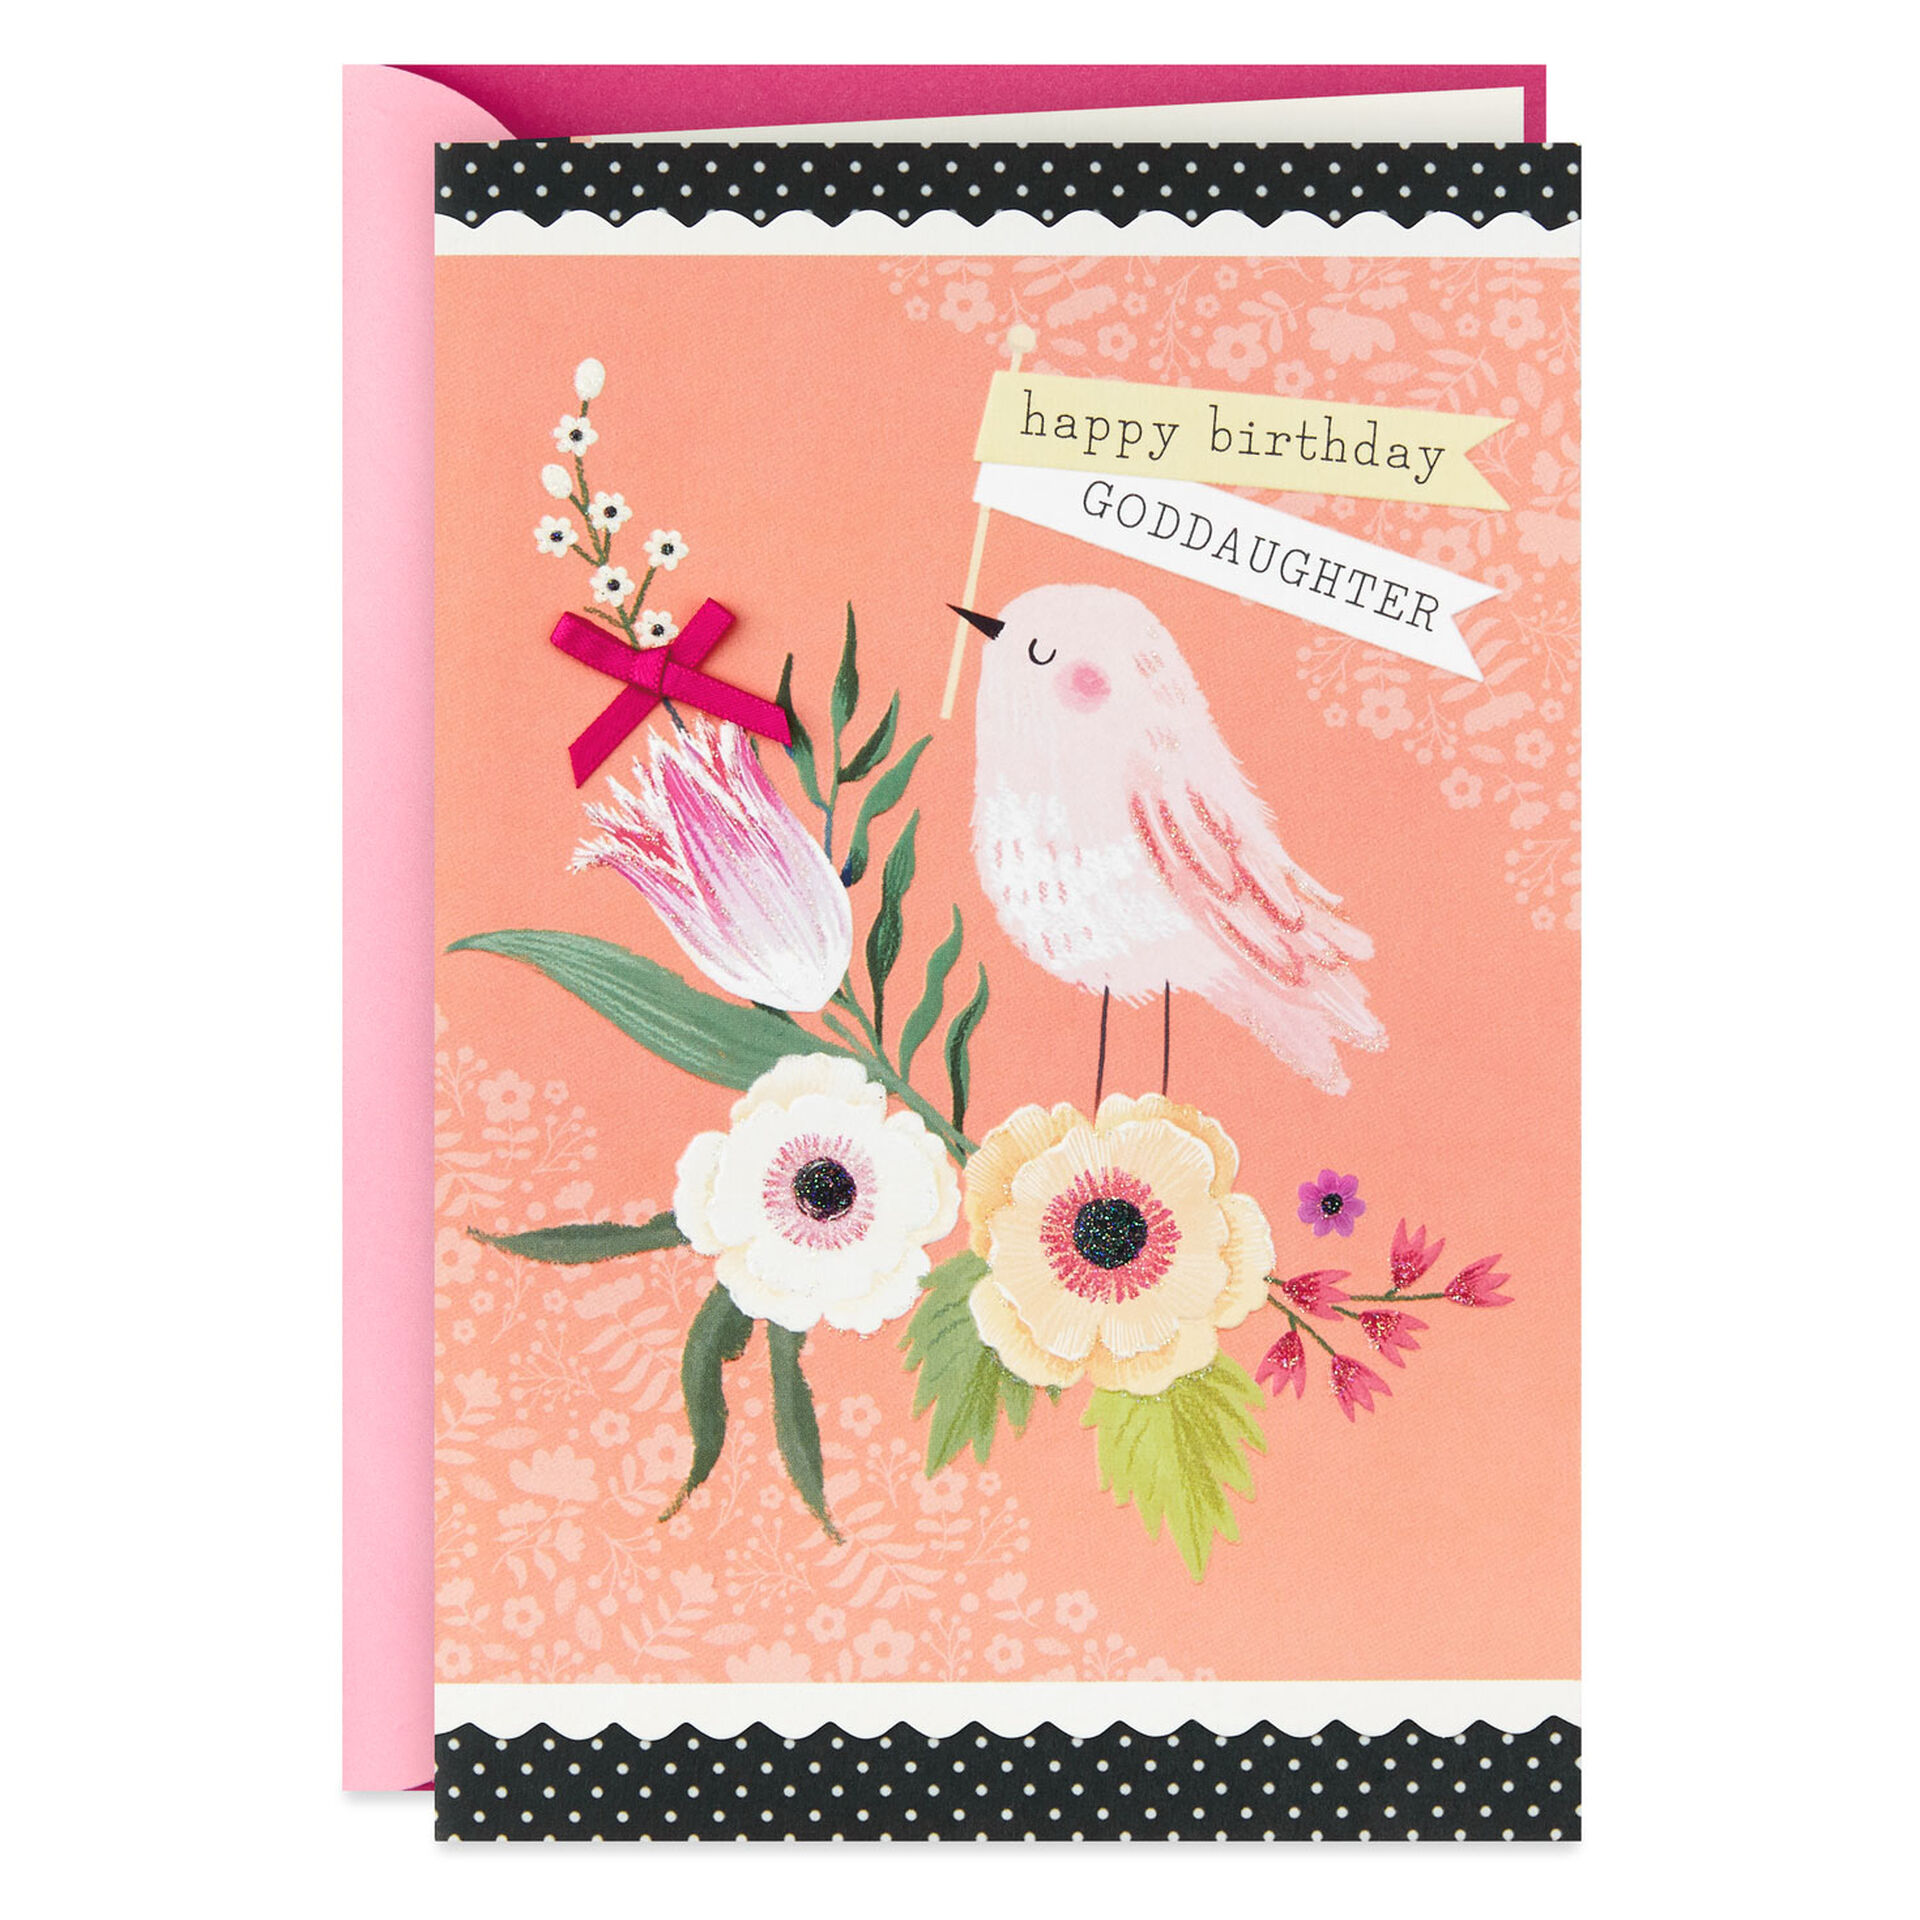 Blessing-in-My-Life-Birthday-Card_399FBD3776_01